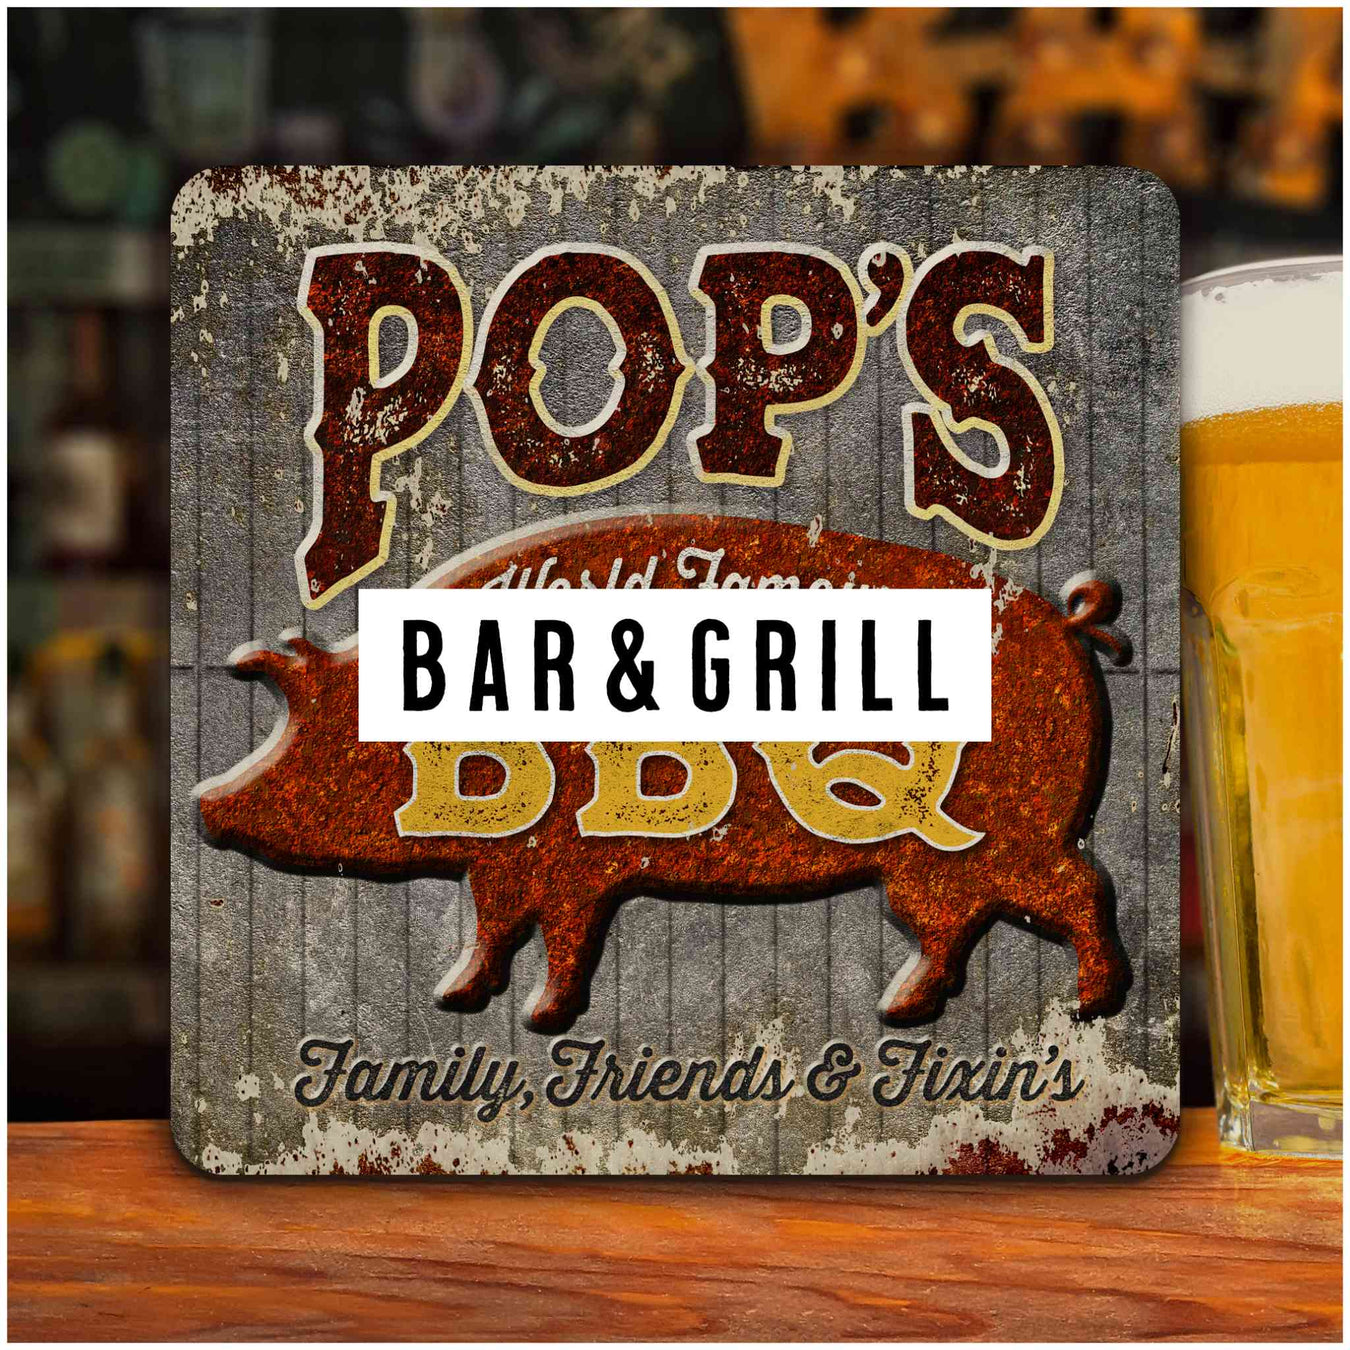 One of Sunshine Corner's Bar and Grill Signs, "Pop's BBQ" with a banner labeled "Bar and grill" on top with a dark overlay.